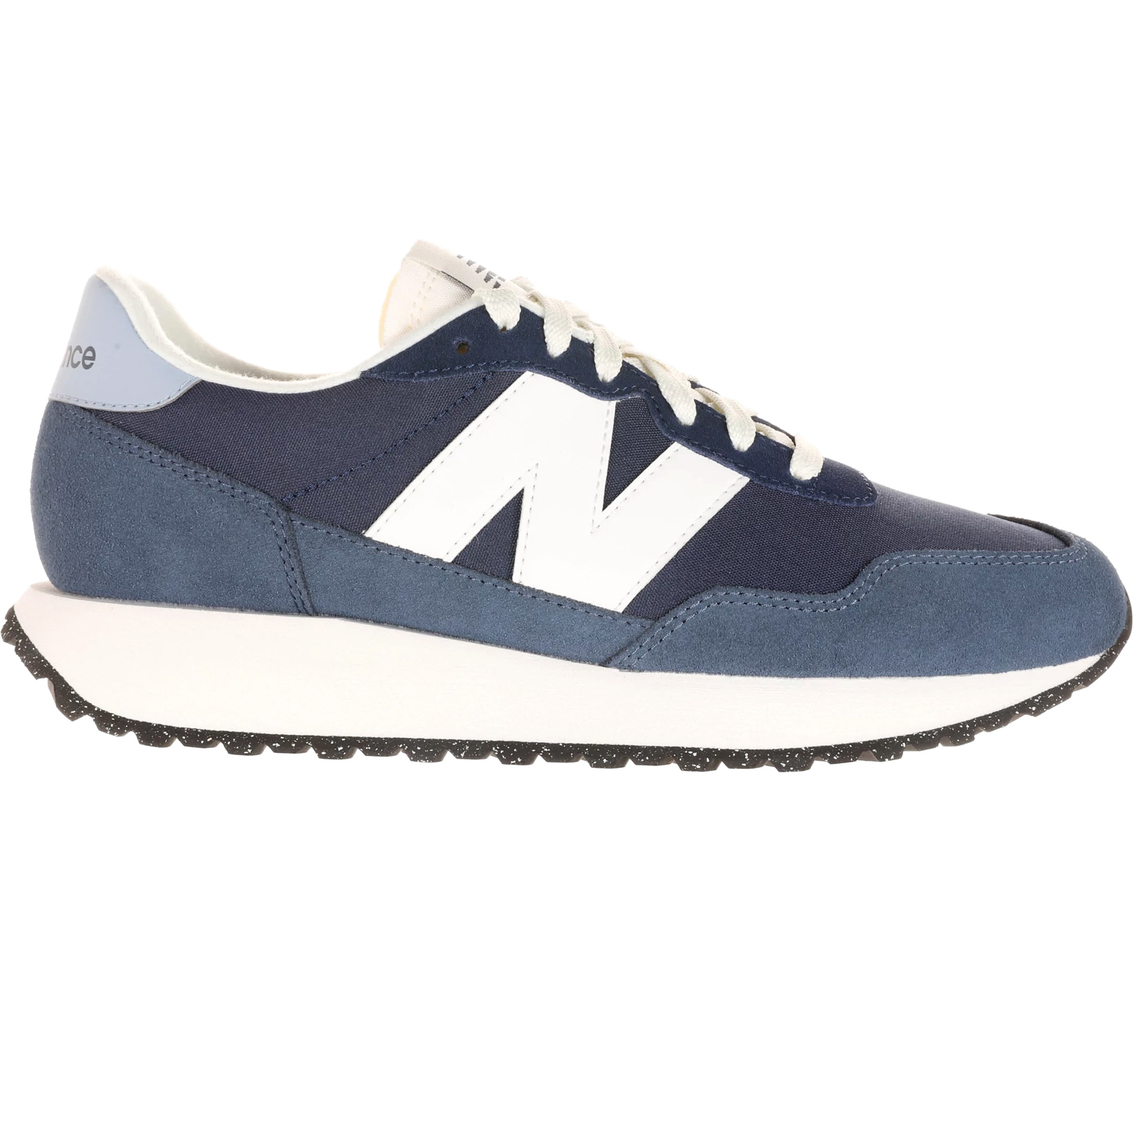 New Balance Women's 237 Sneakers | Women's Athletic Shoes | Shoes ...